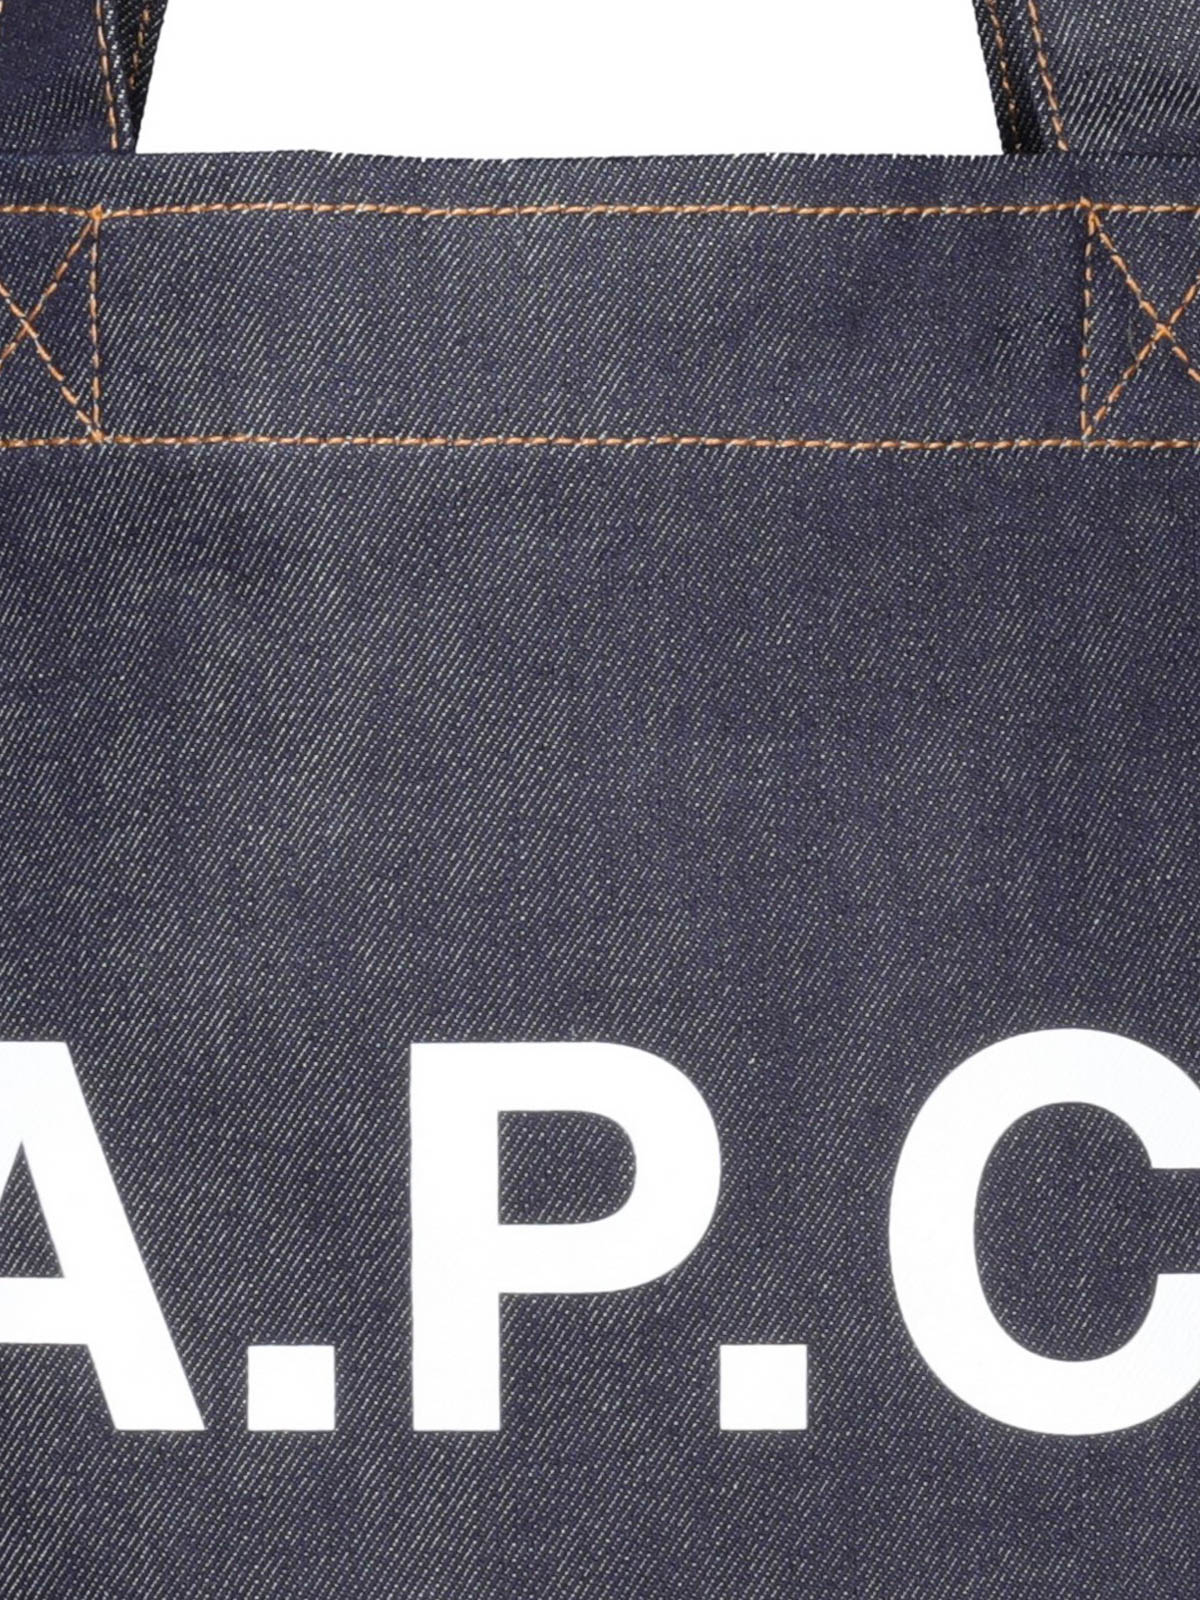 Shop Apc Axel Denim And Leather Shopping Bag In Lavado Oscuro